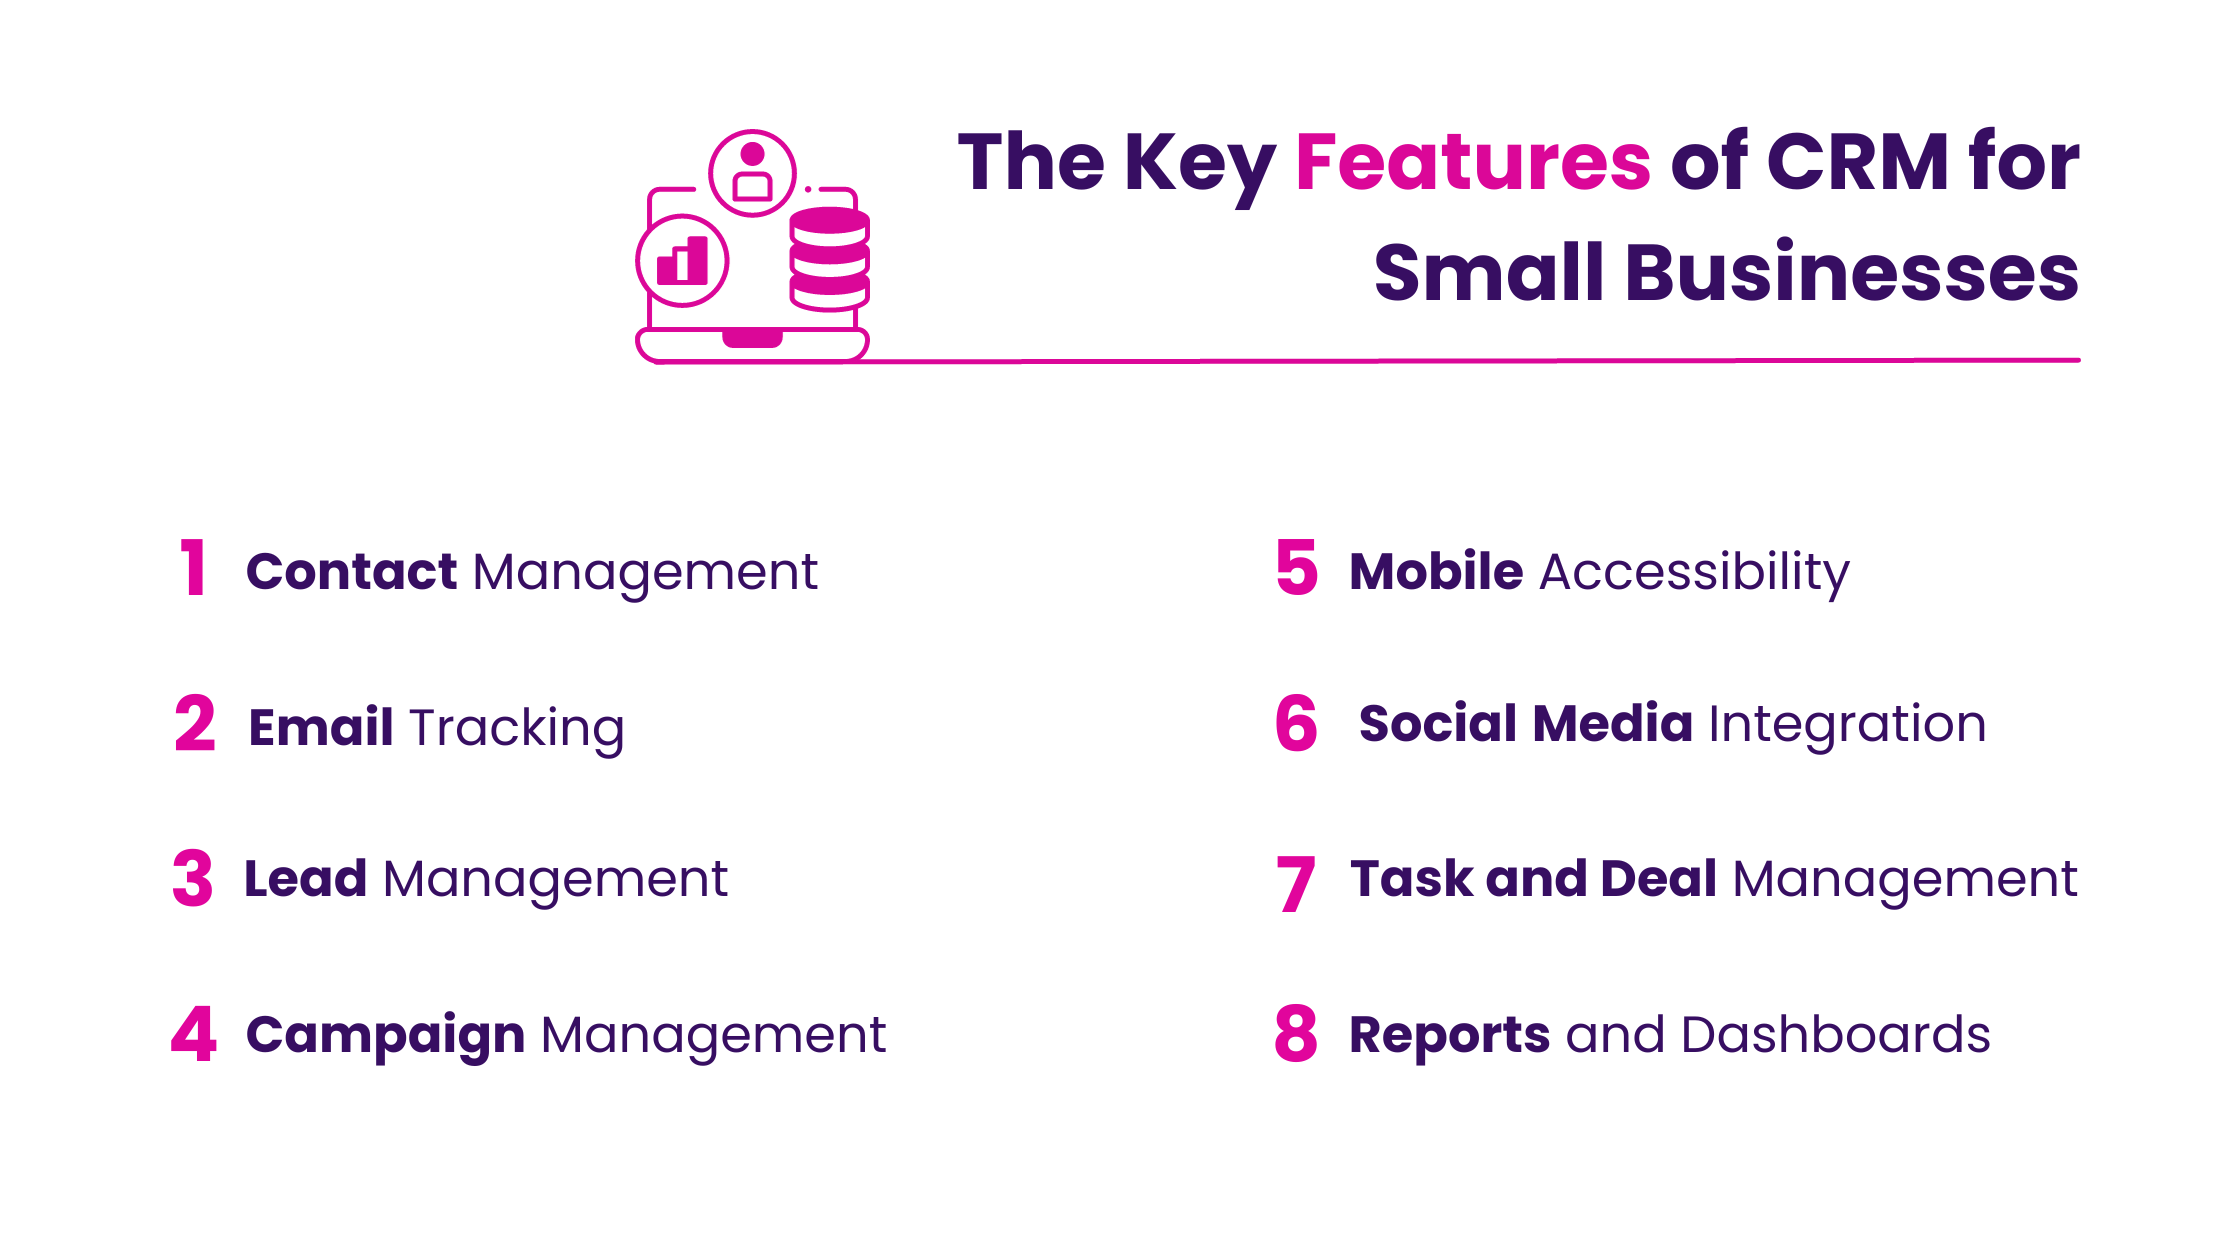 Key Features of CRM for Small Businesses